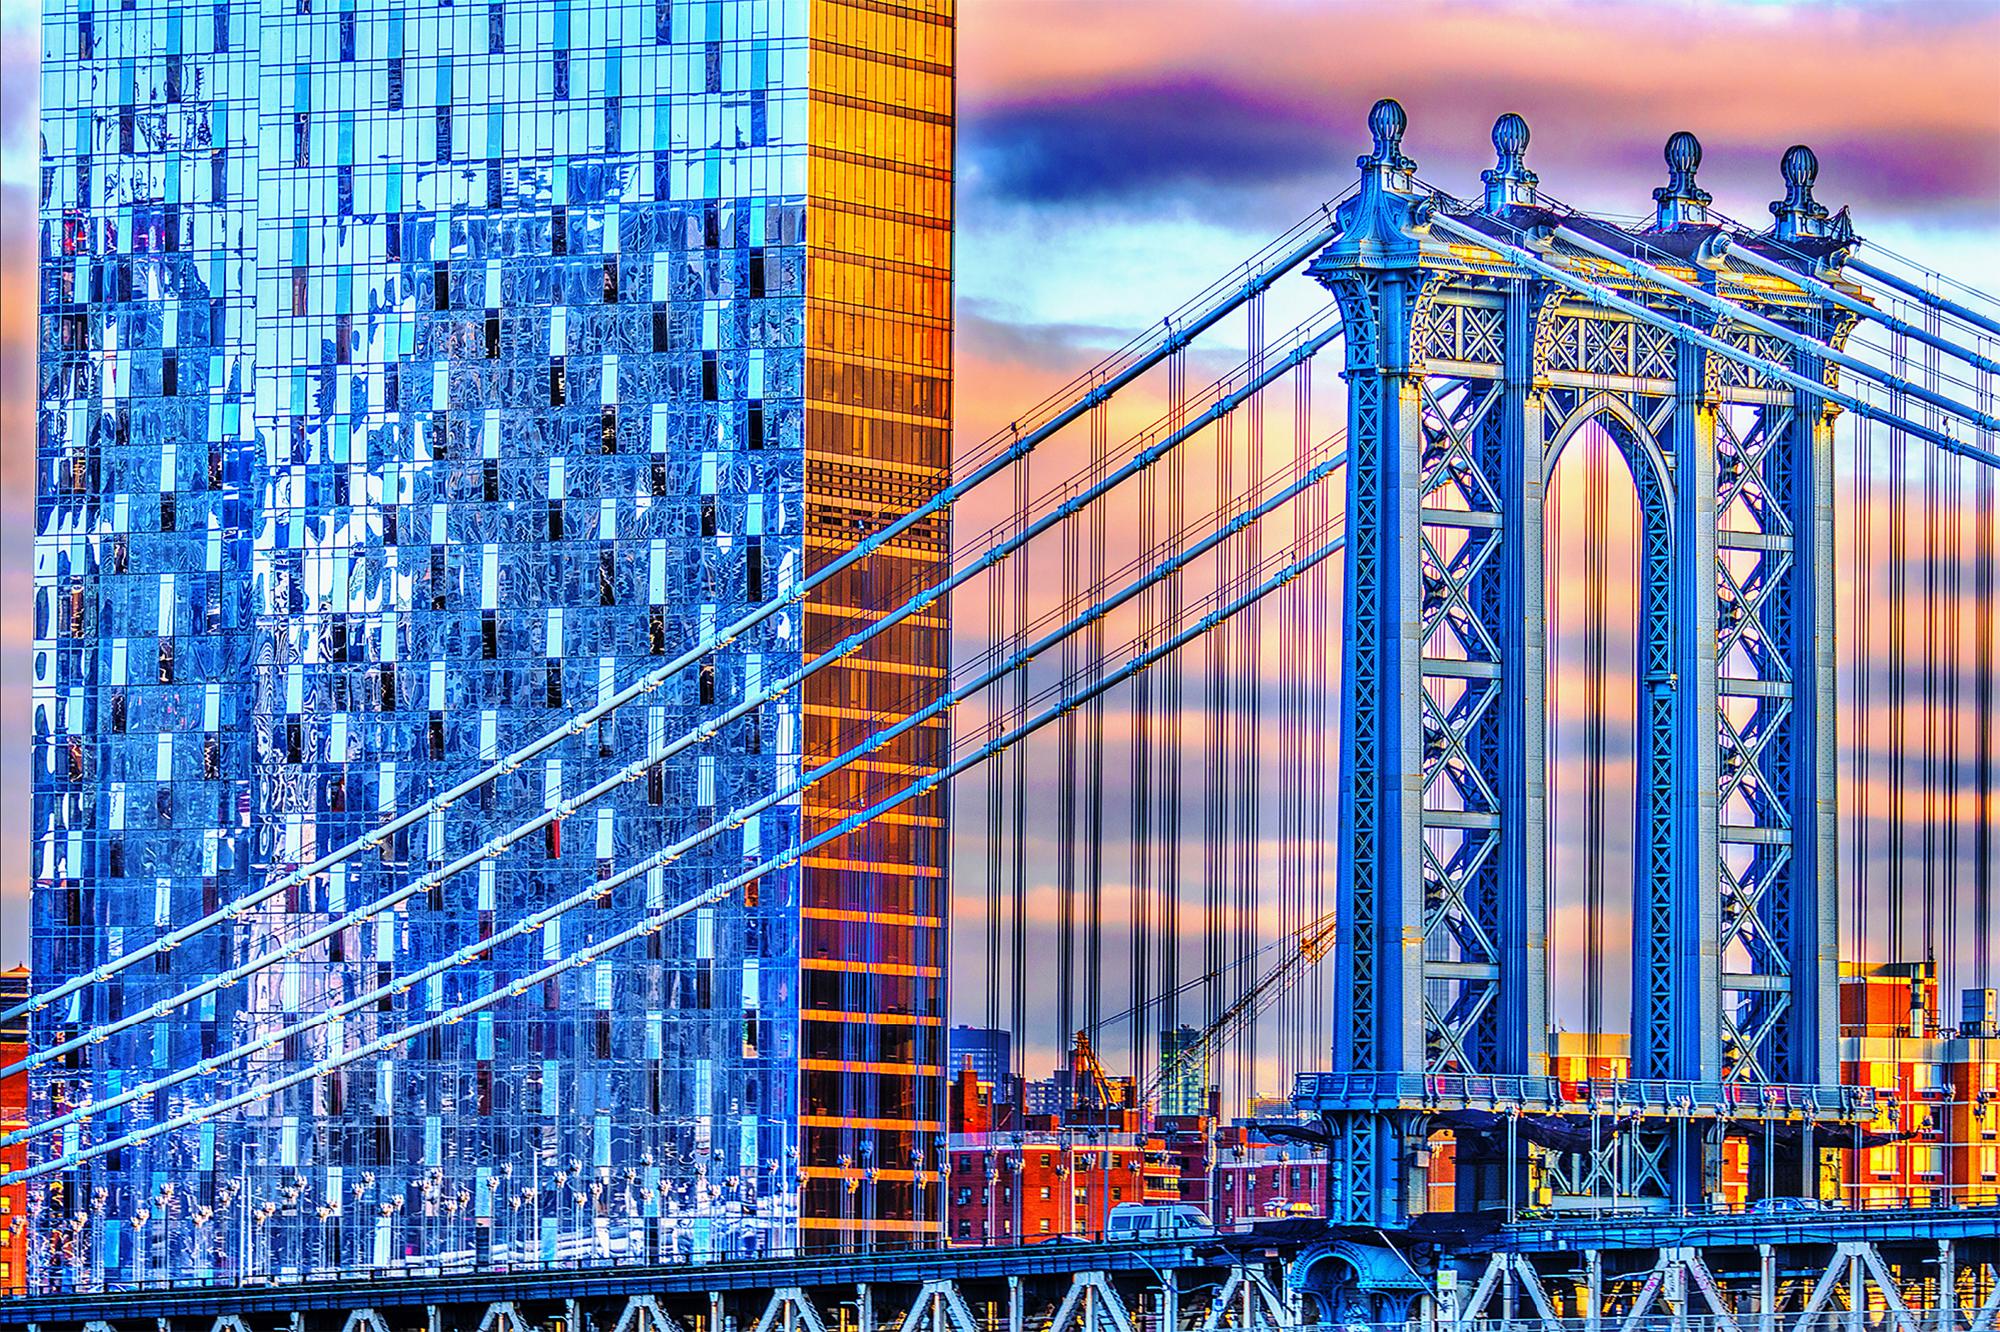 Mitchell Funk Color Photograph - Manhattan Bridge from Brooklyn in Blue and Gold